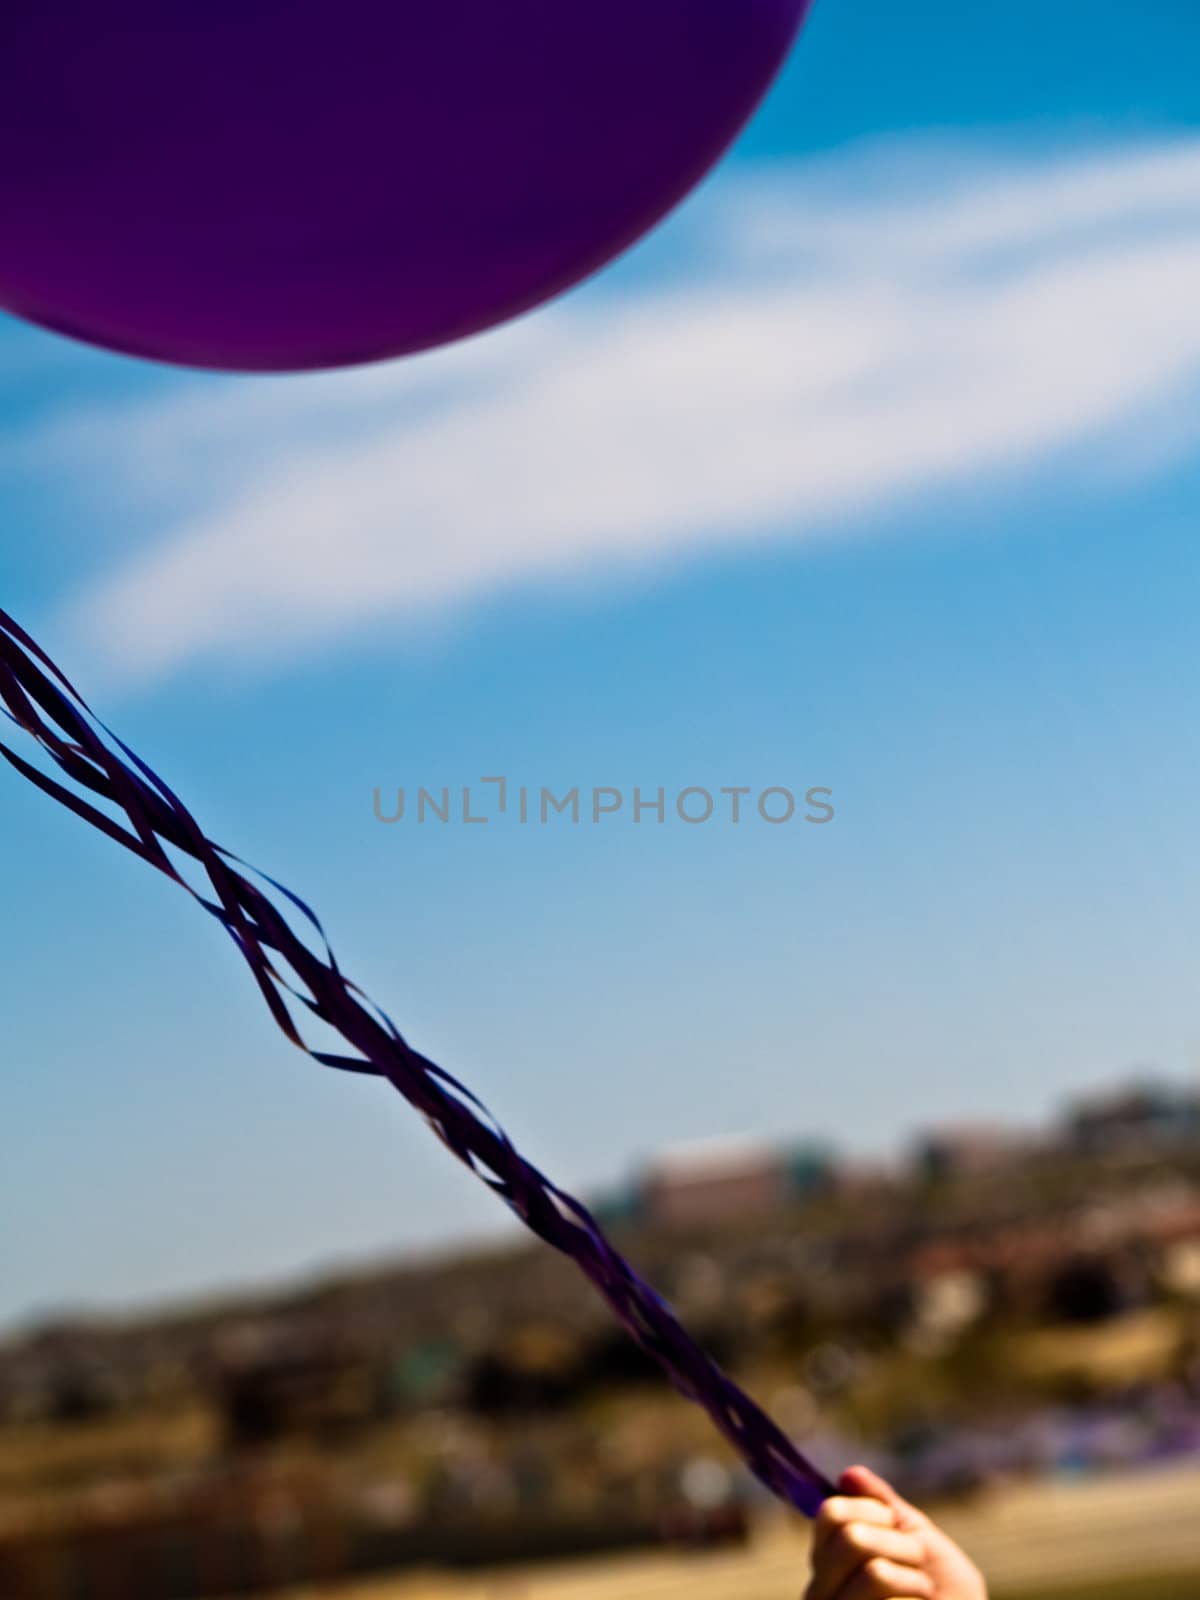 Pretty little girl with baloons in hand by chaosmediamgt